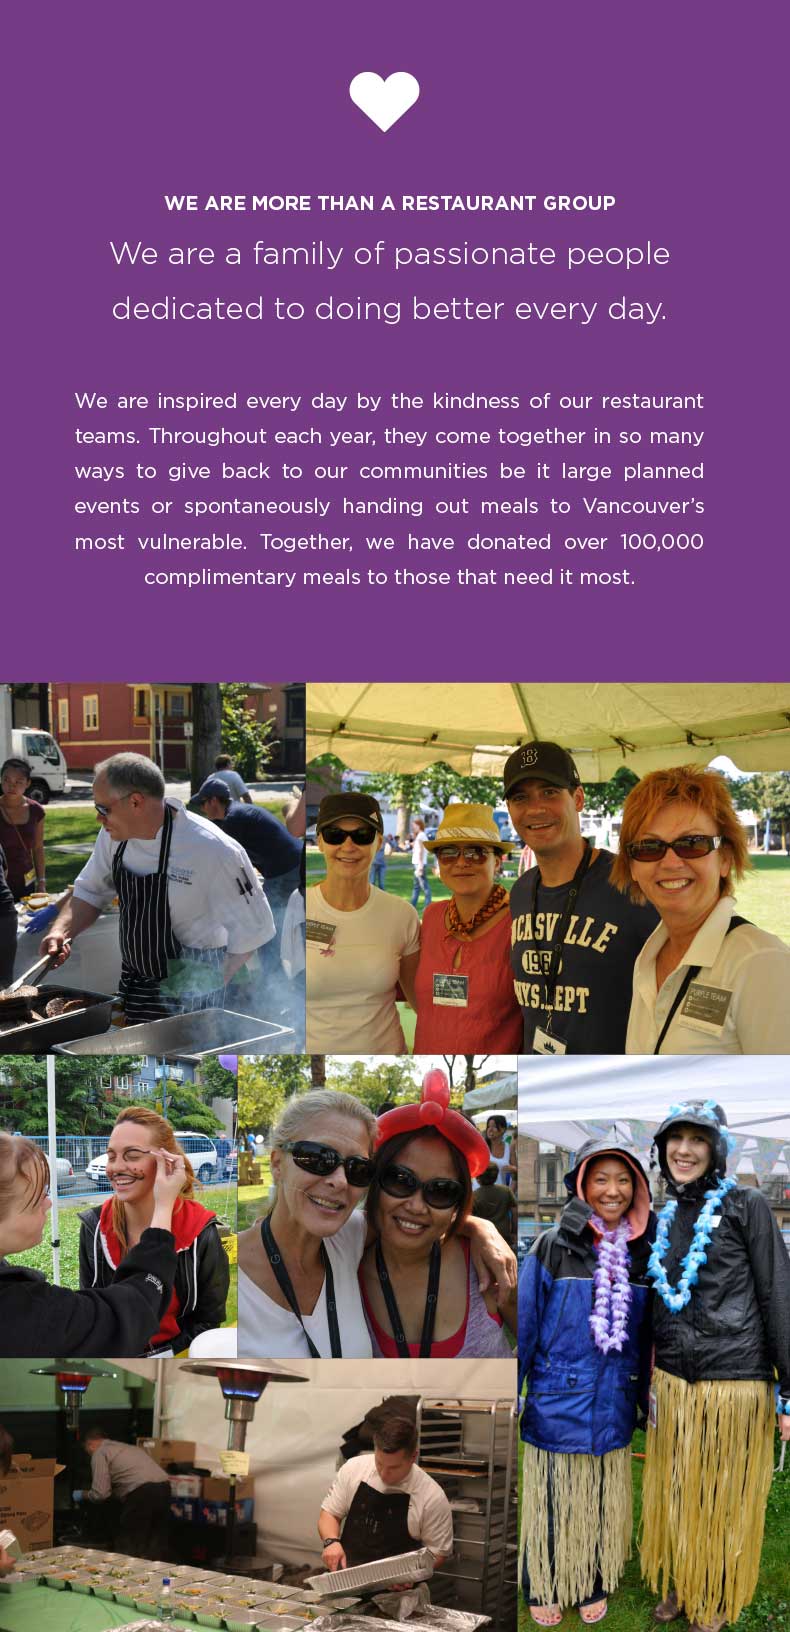 We are inspired every day by the kindness of our restaurant teams. Throughout each year, they come together in so many ways to give back to our communities be it large planned events or spontaneously handing out meals to Vancouver’s most vulnerable. Together, we have donated over 100,000 complimentary meals to those that need it most.